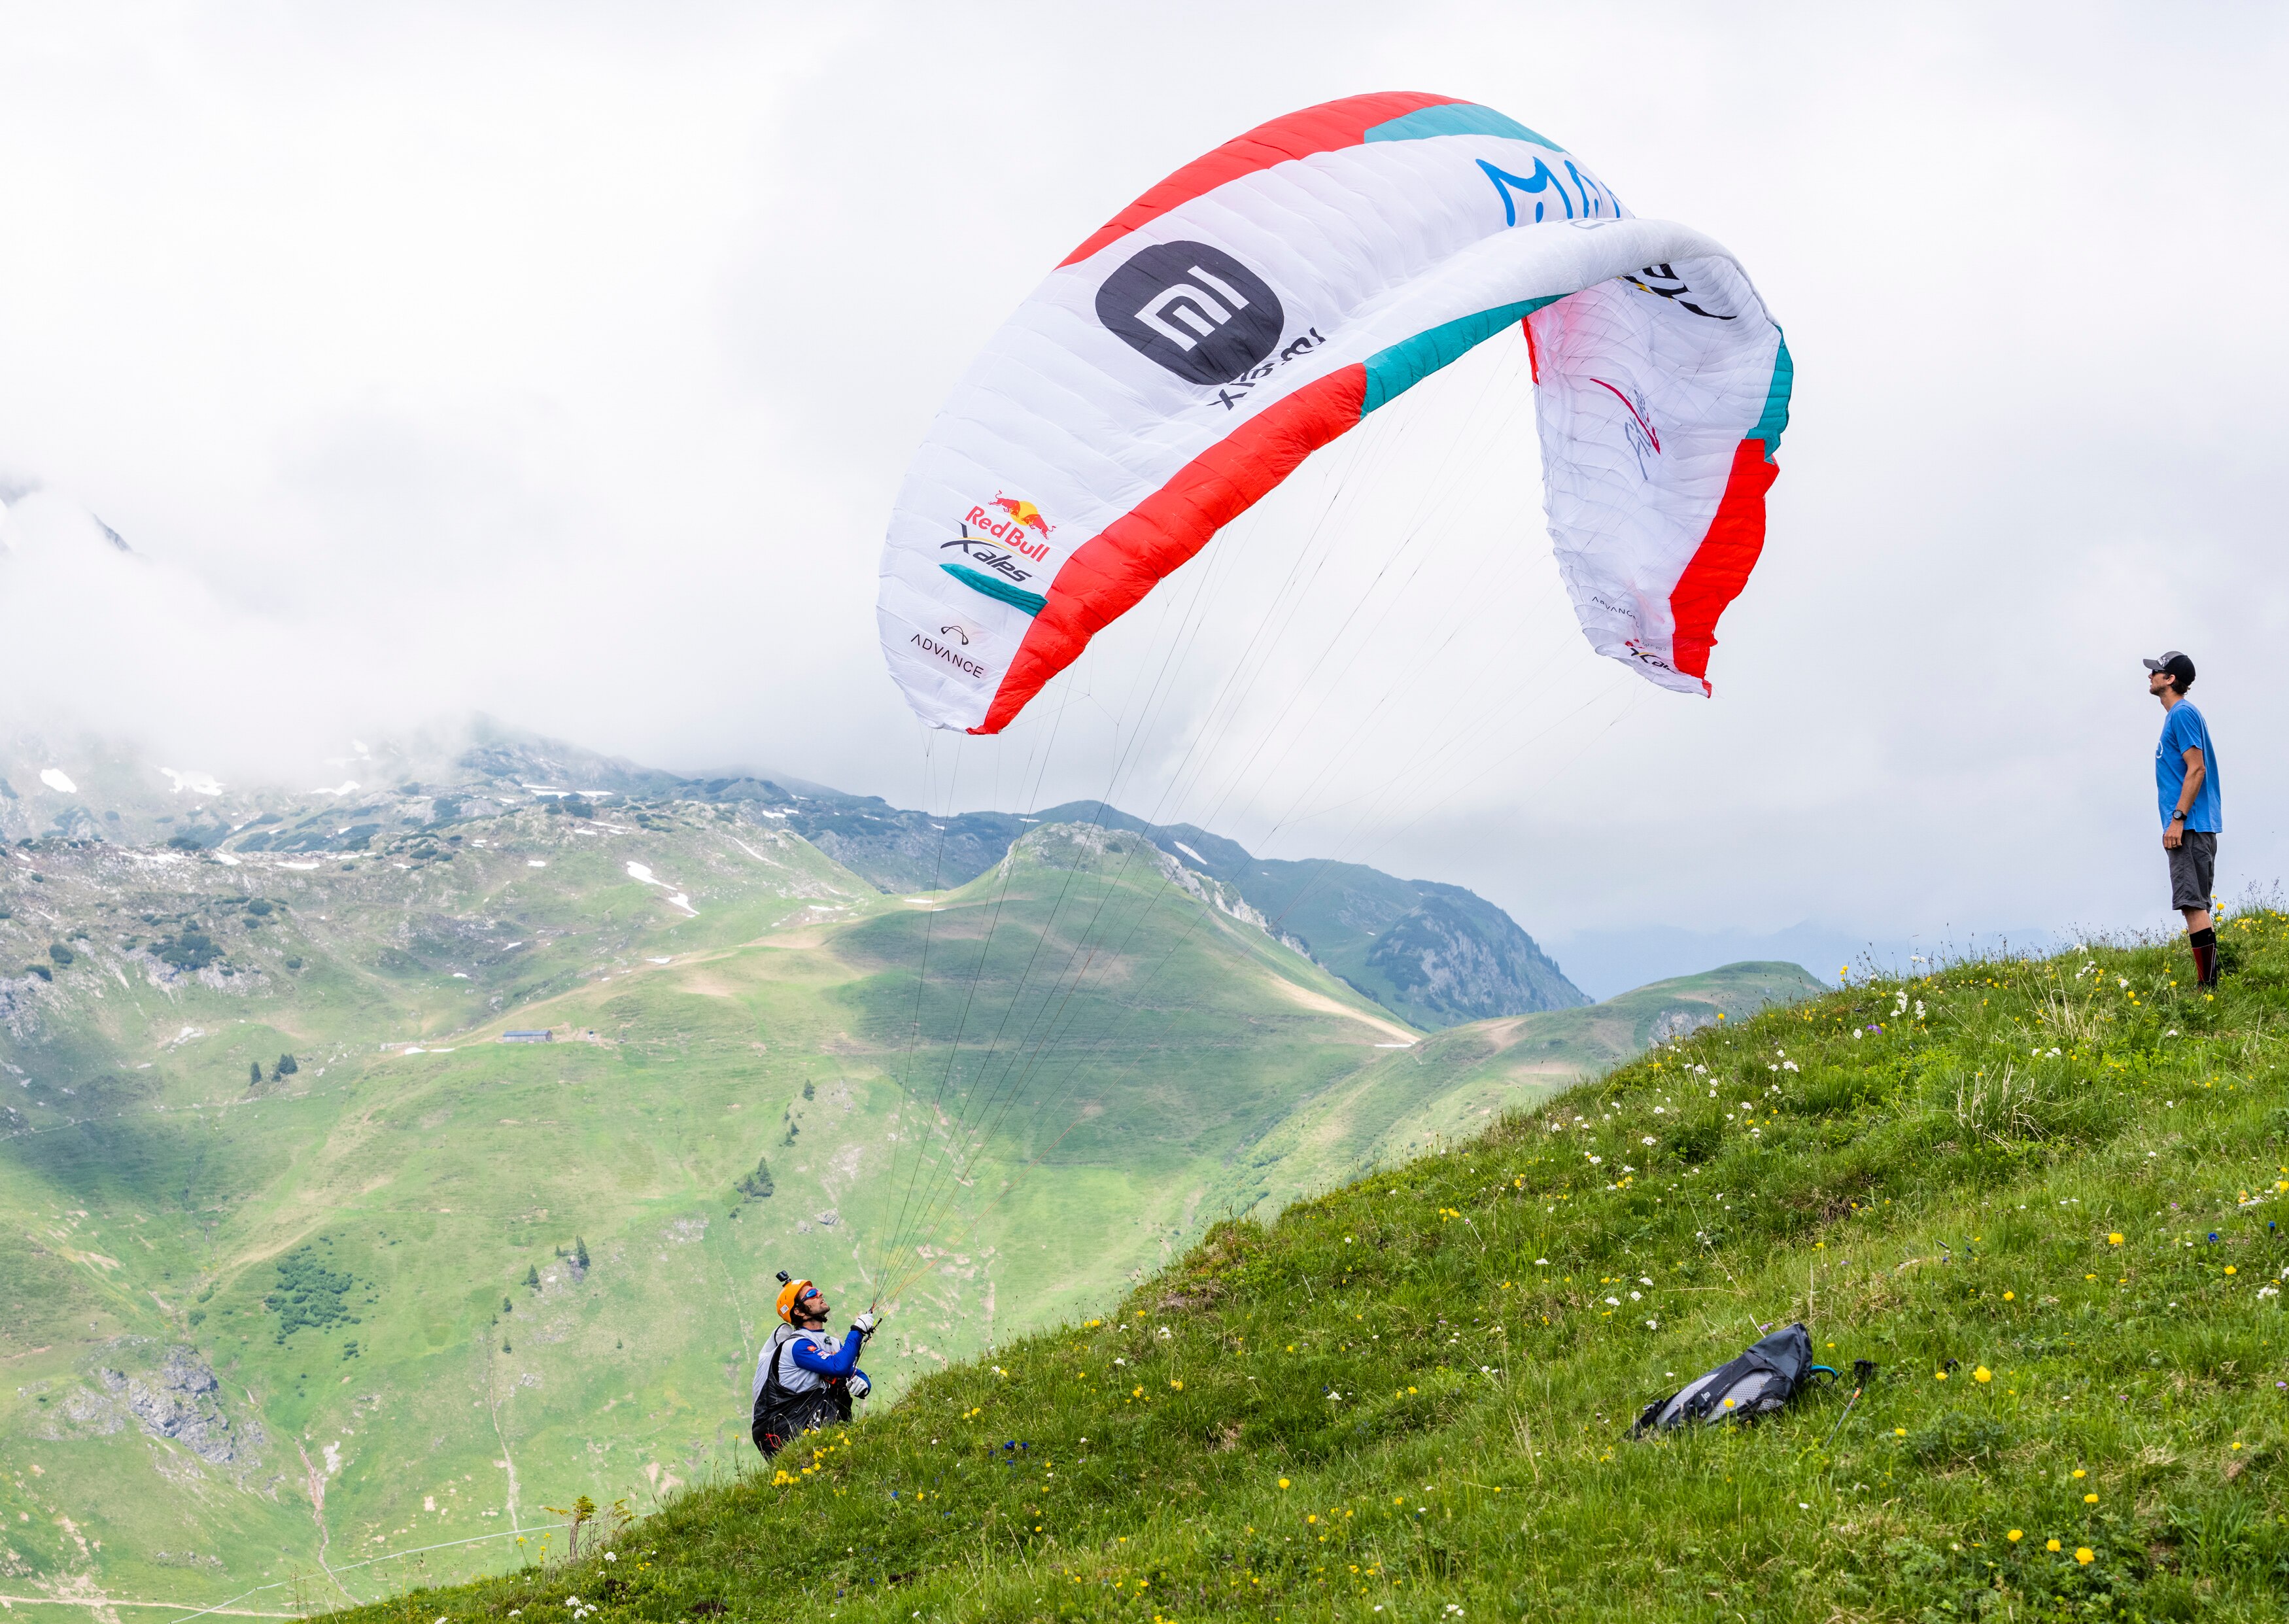 GBR launching during X-Alps in Warth, Austria on June 24, 2021